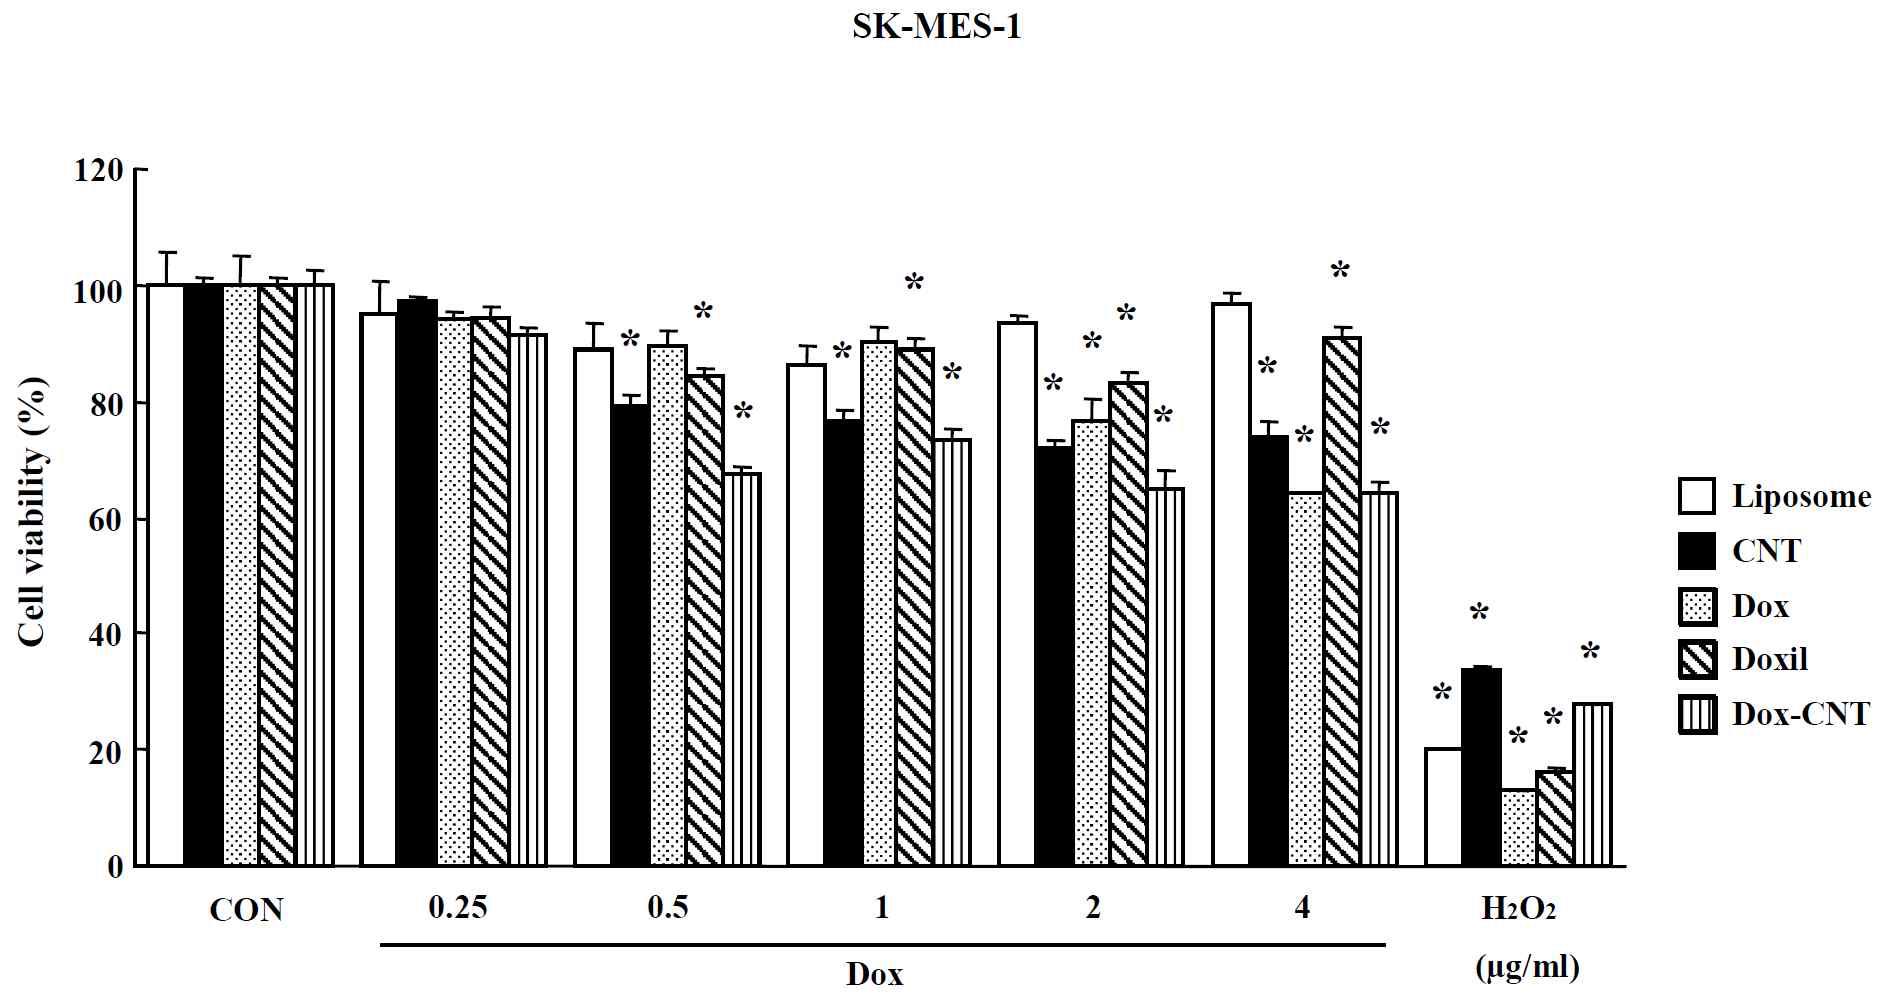 Effects of nano-anticancer drugs on MTT assay in SK-MES-1 cells. Cells were treated with drugs for 24 hr. Data are shown as means ± SE (n = 5). * p<0.05, significantly different from the control.